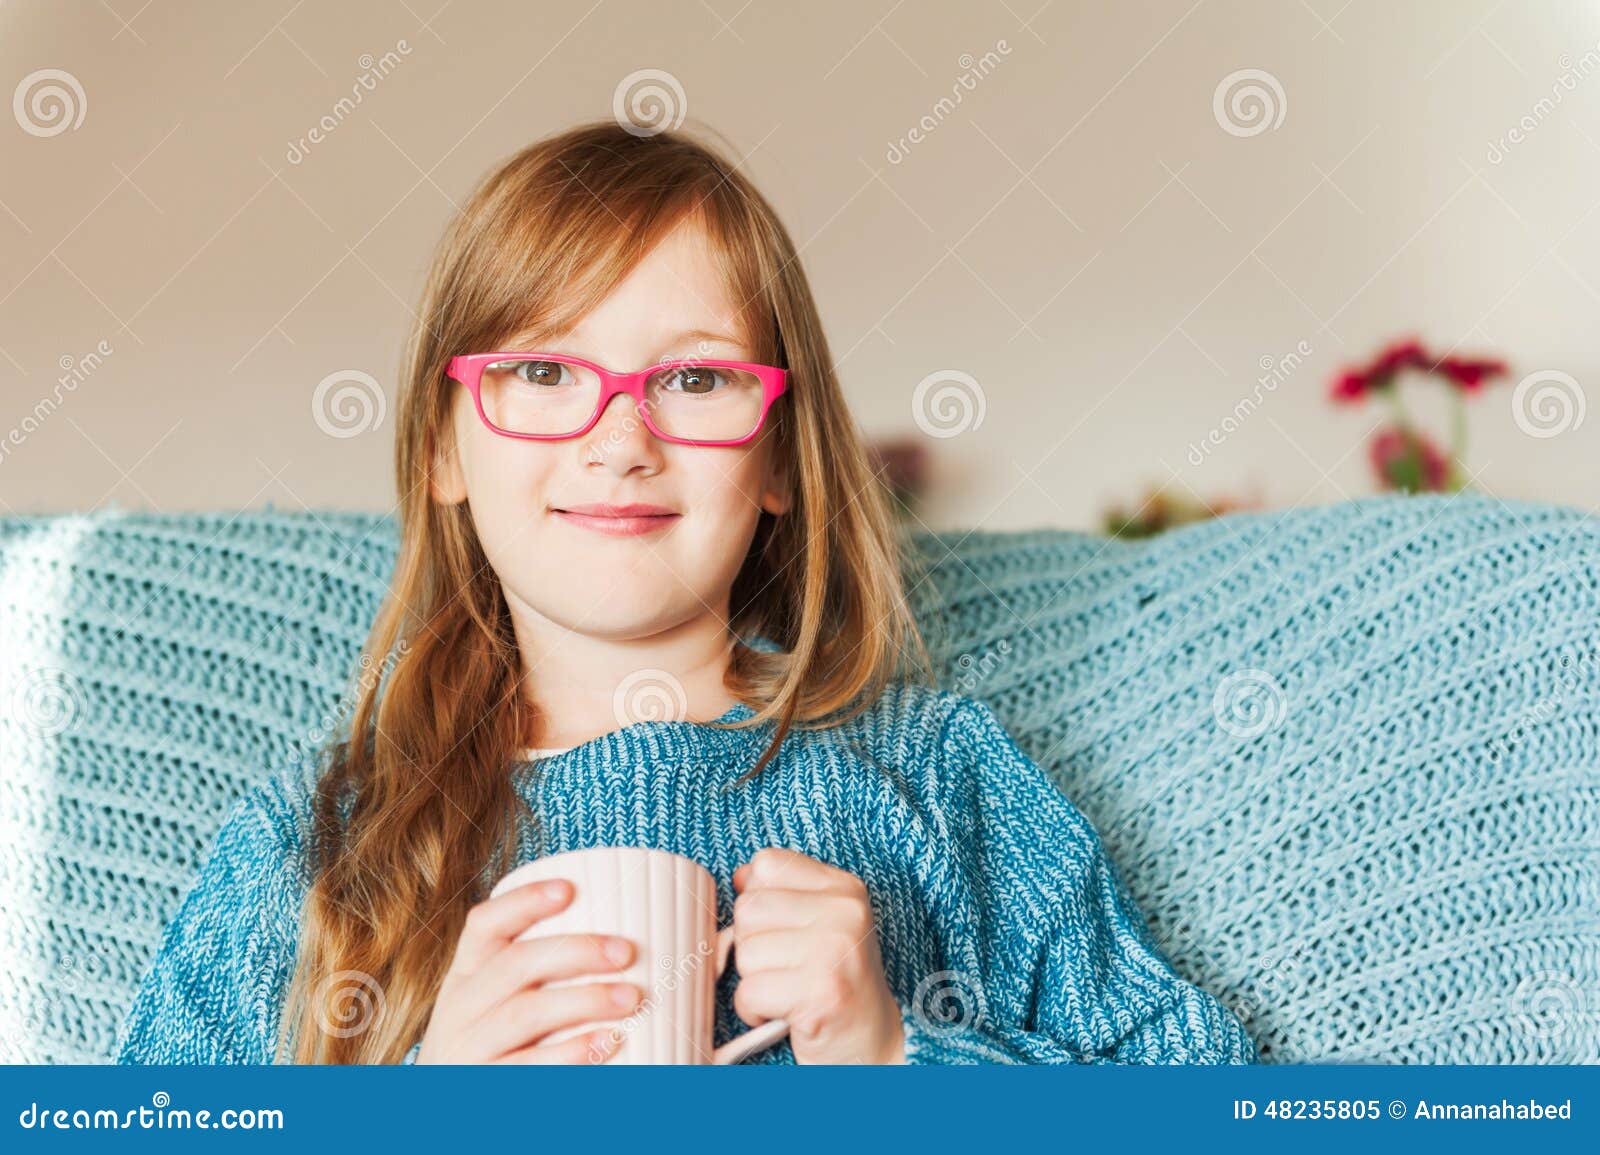 Little Girl Wearing Glasses Stock Image - Image of healthy, emotional ...